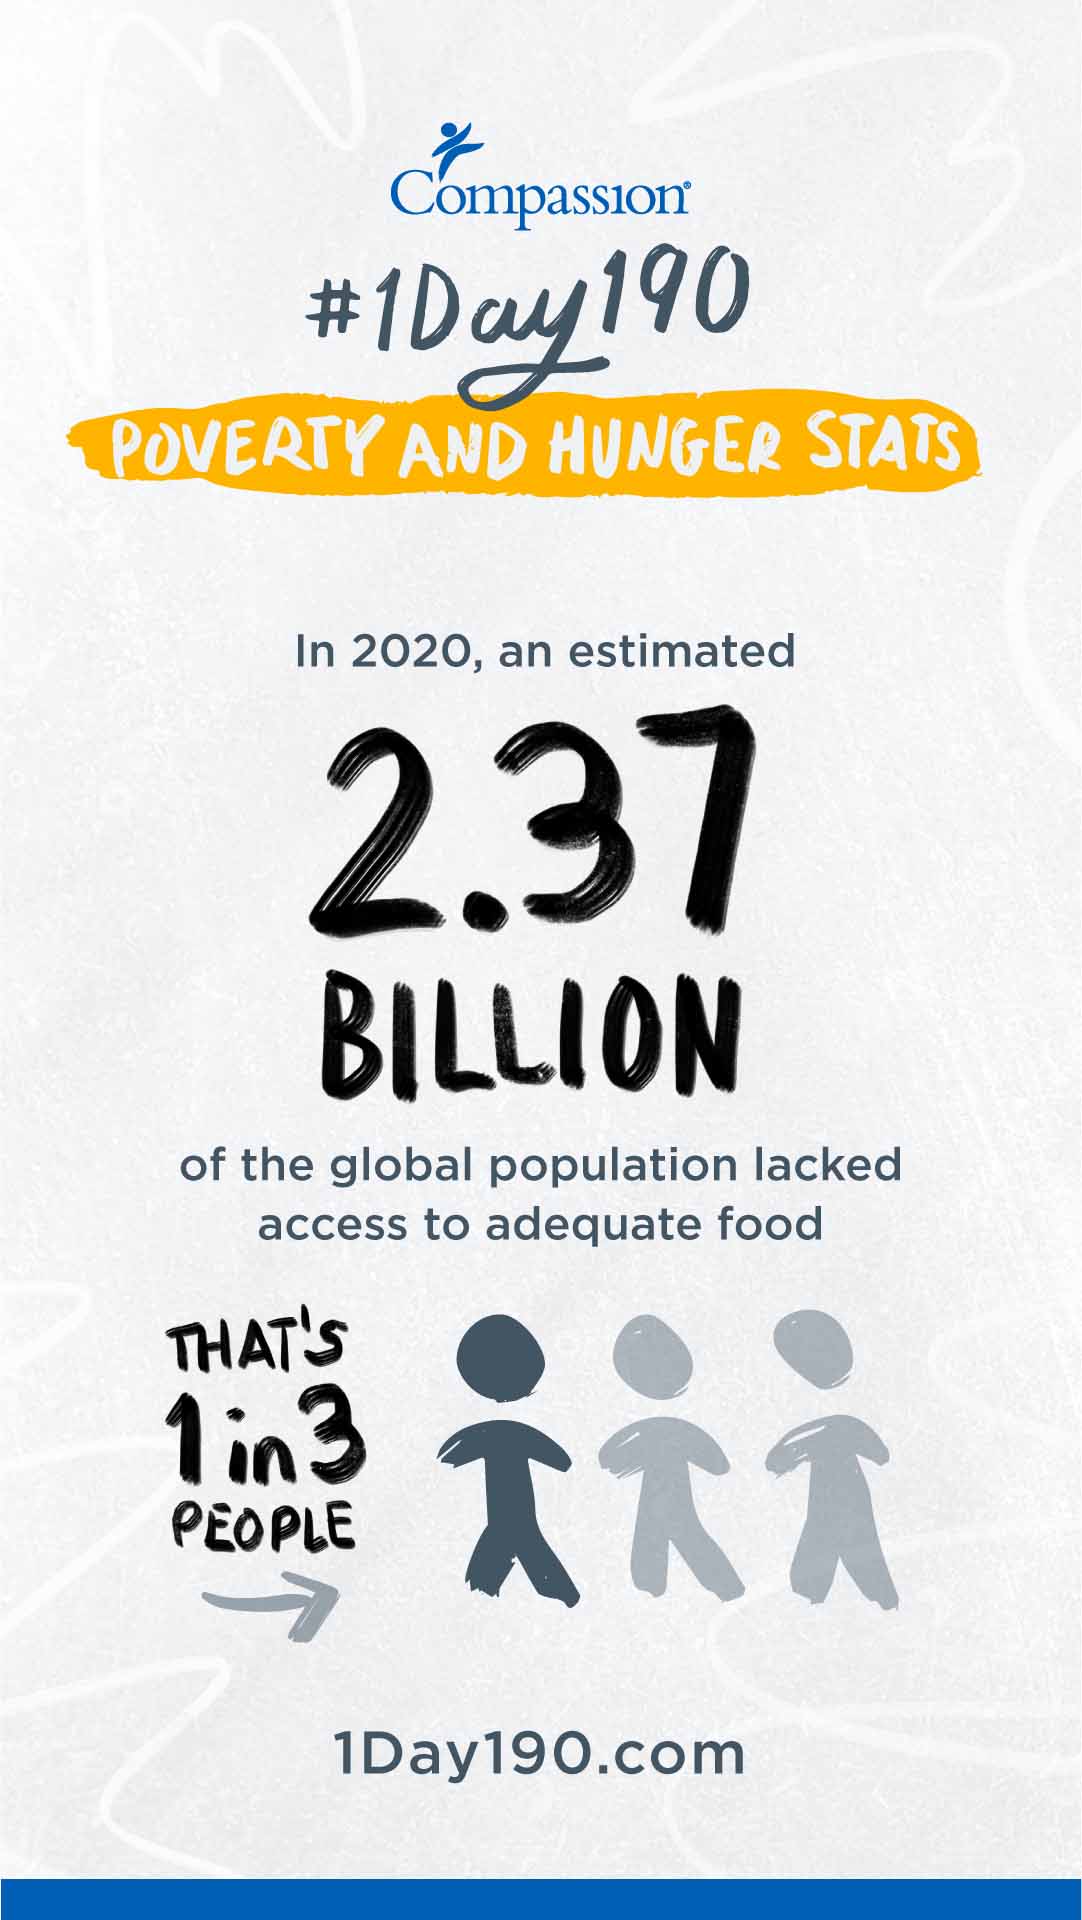 1 in 3 people lack adequate food access